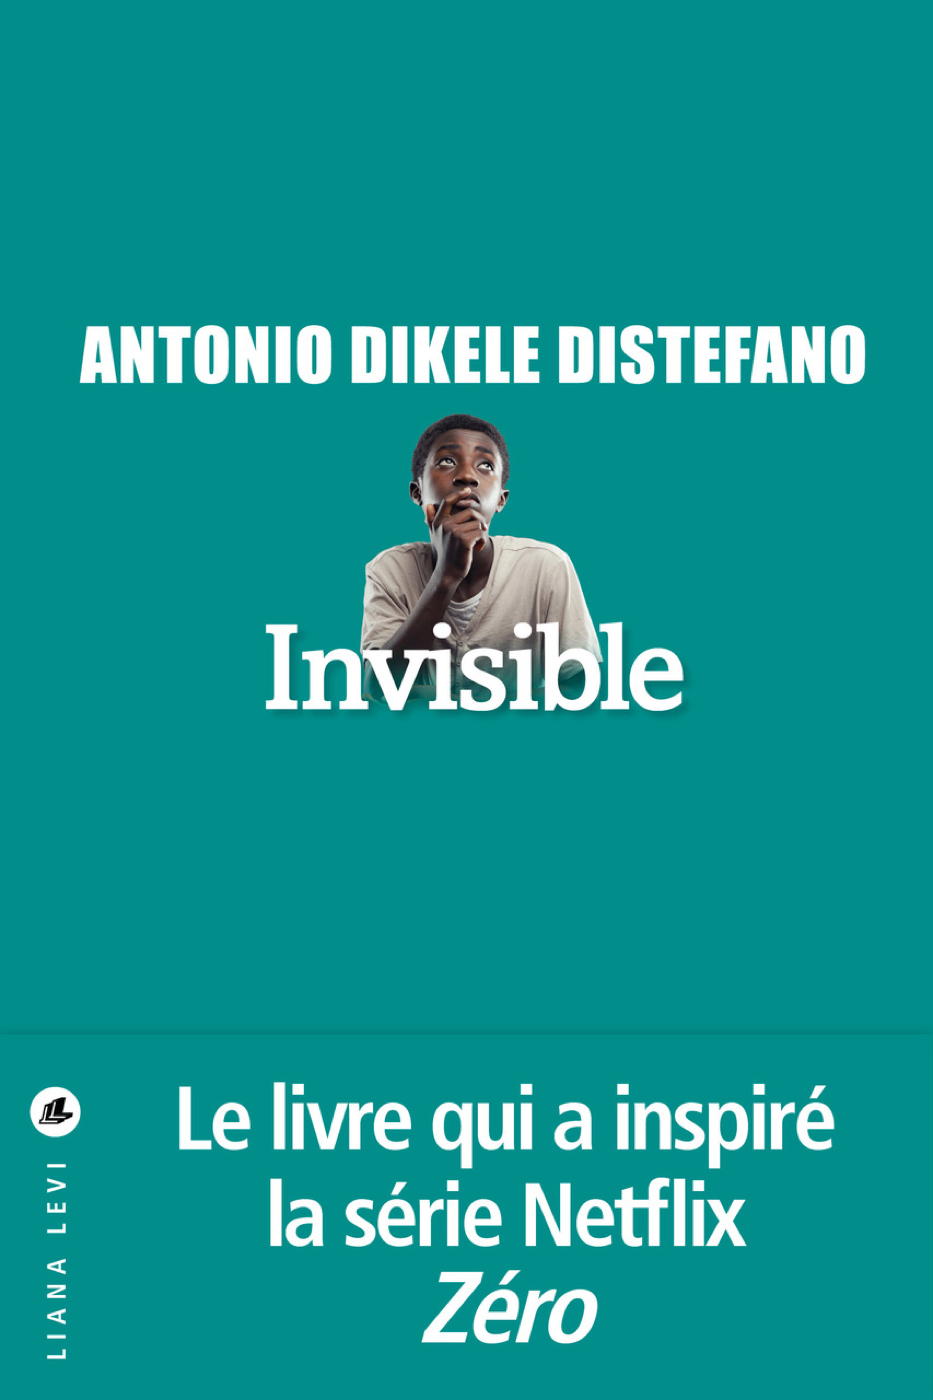 Afficher "Invisible"